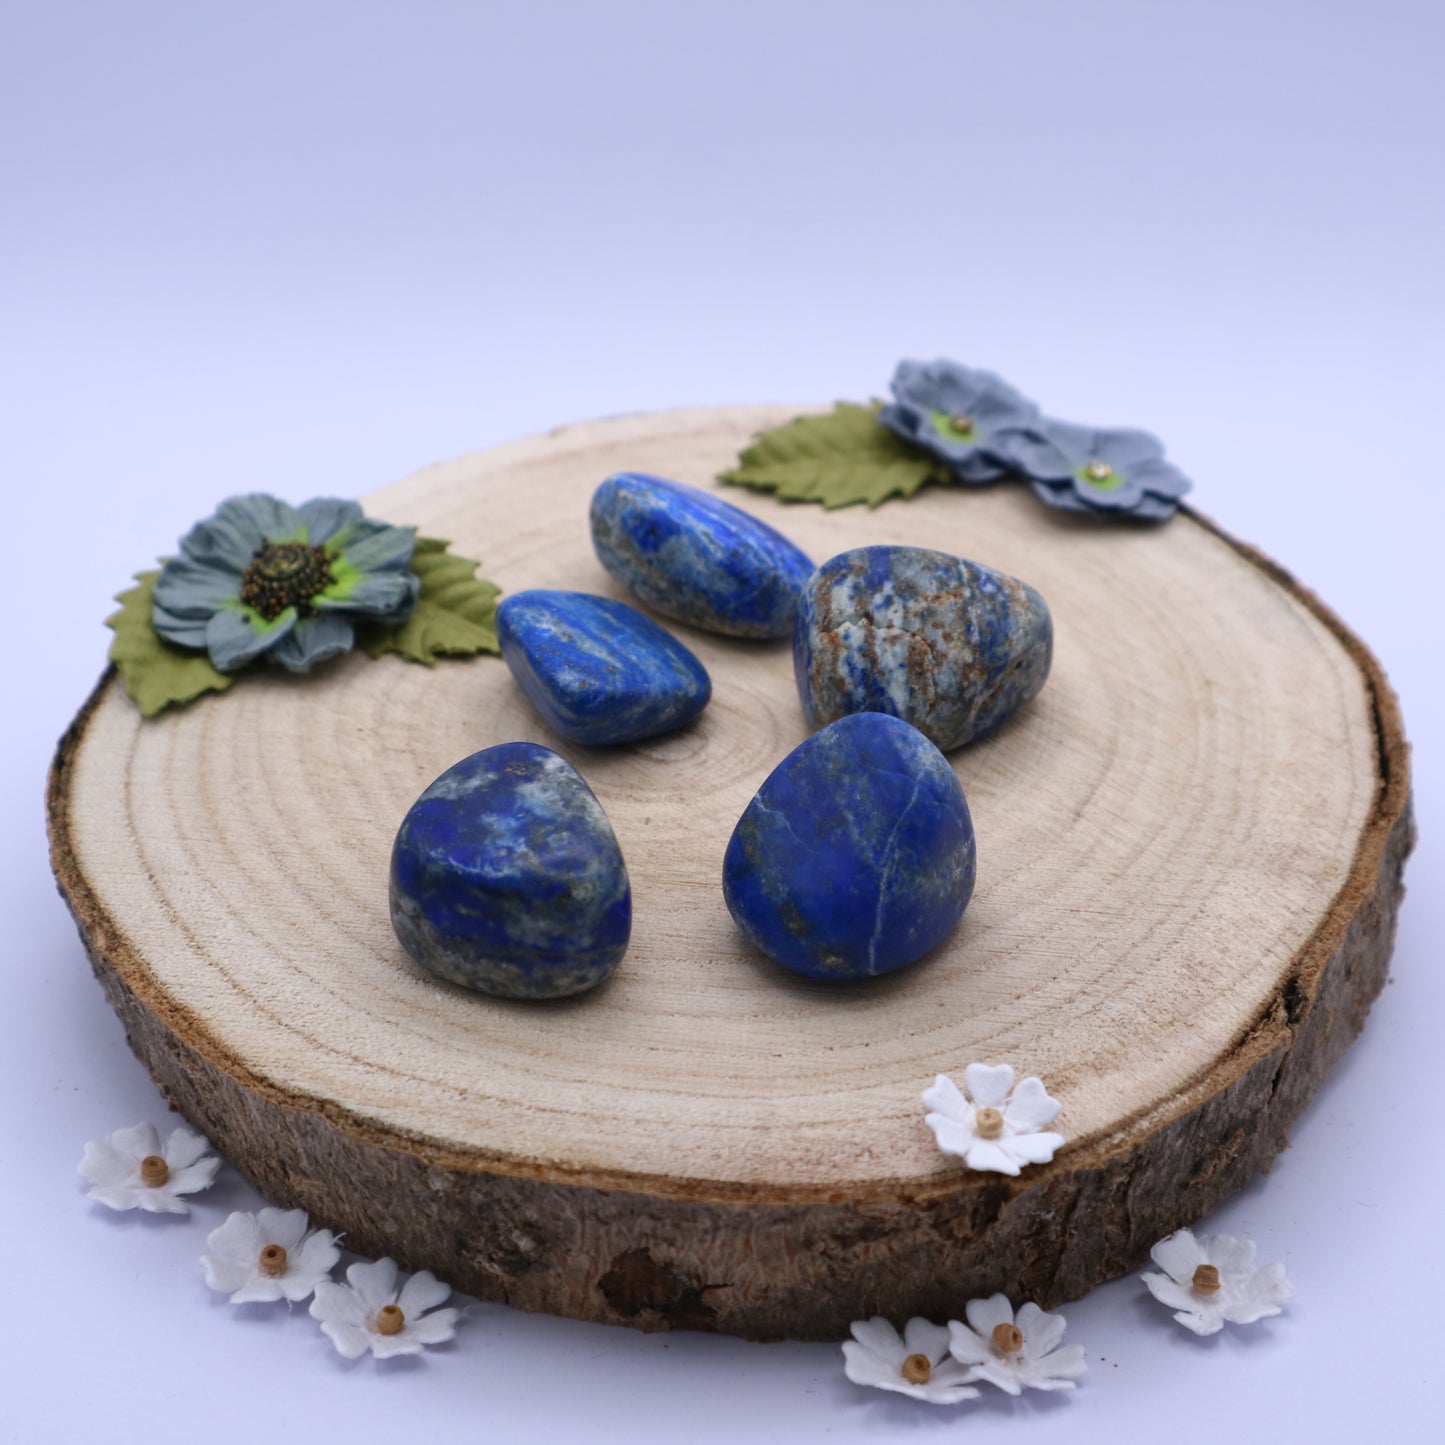 Five pieces of Lapis Lazuli crystals displayed on a piece of wood surrounded by flowers